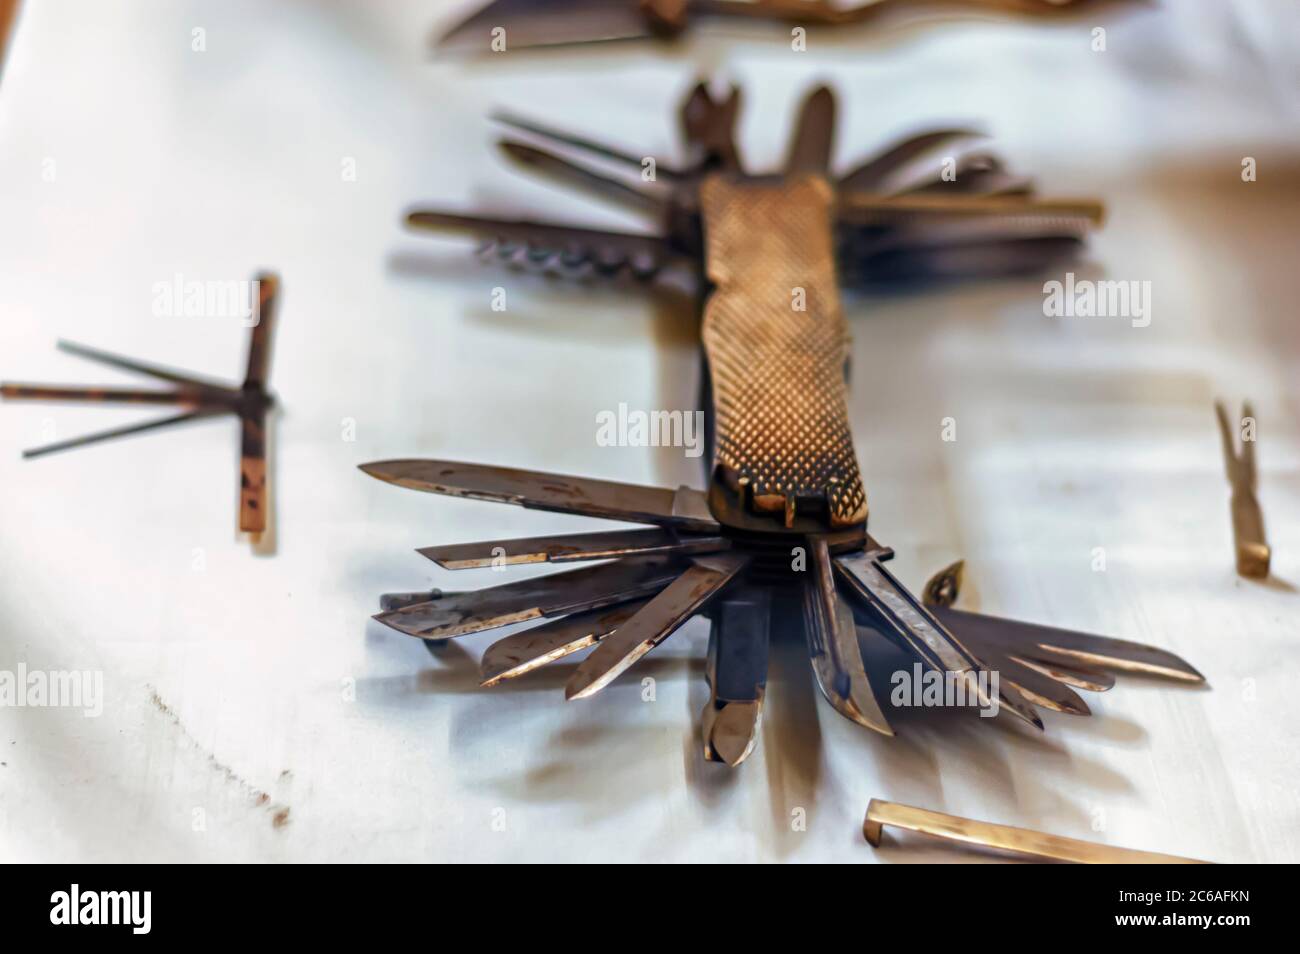 A rusted Swiss Army knife on display behind a glass cabinet at the Chowmahalla Palace, Hyderabad, Telangana, India. Stock Photo